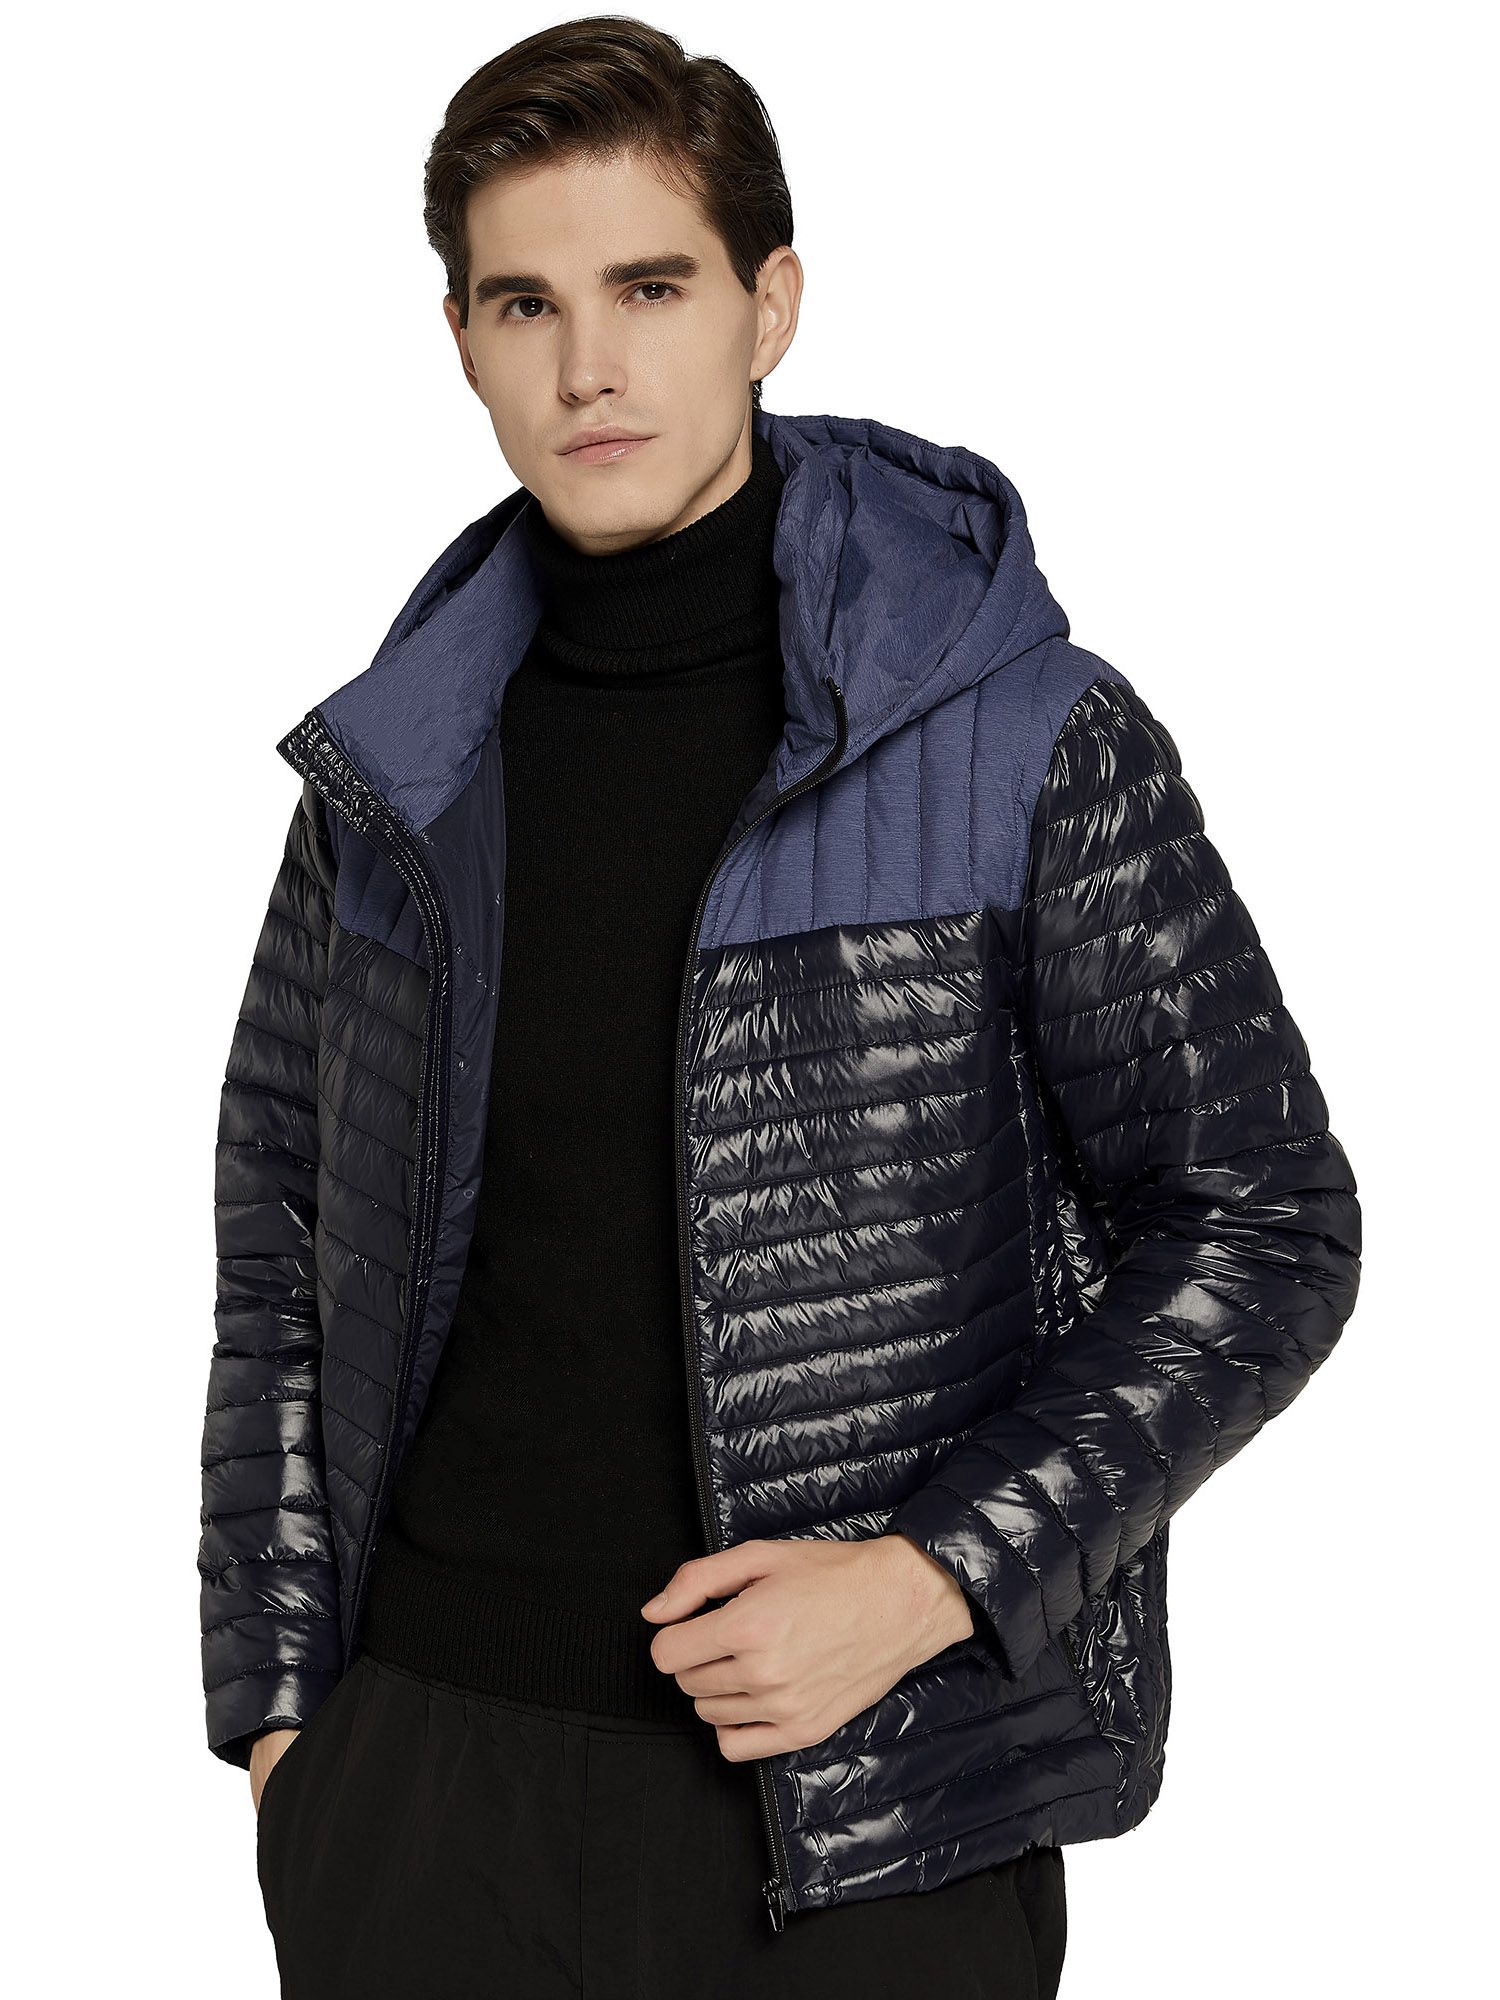 Orolay Men's Long Hooded Winter Down Jacket Warm Puffer Jacket - image 2 of 5